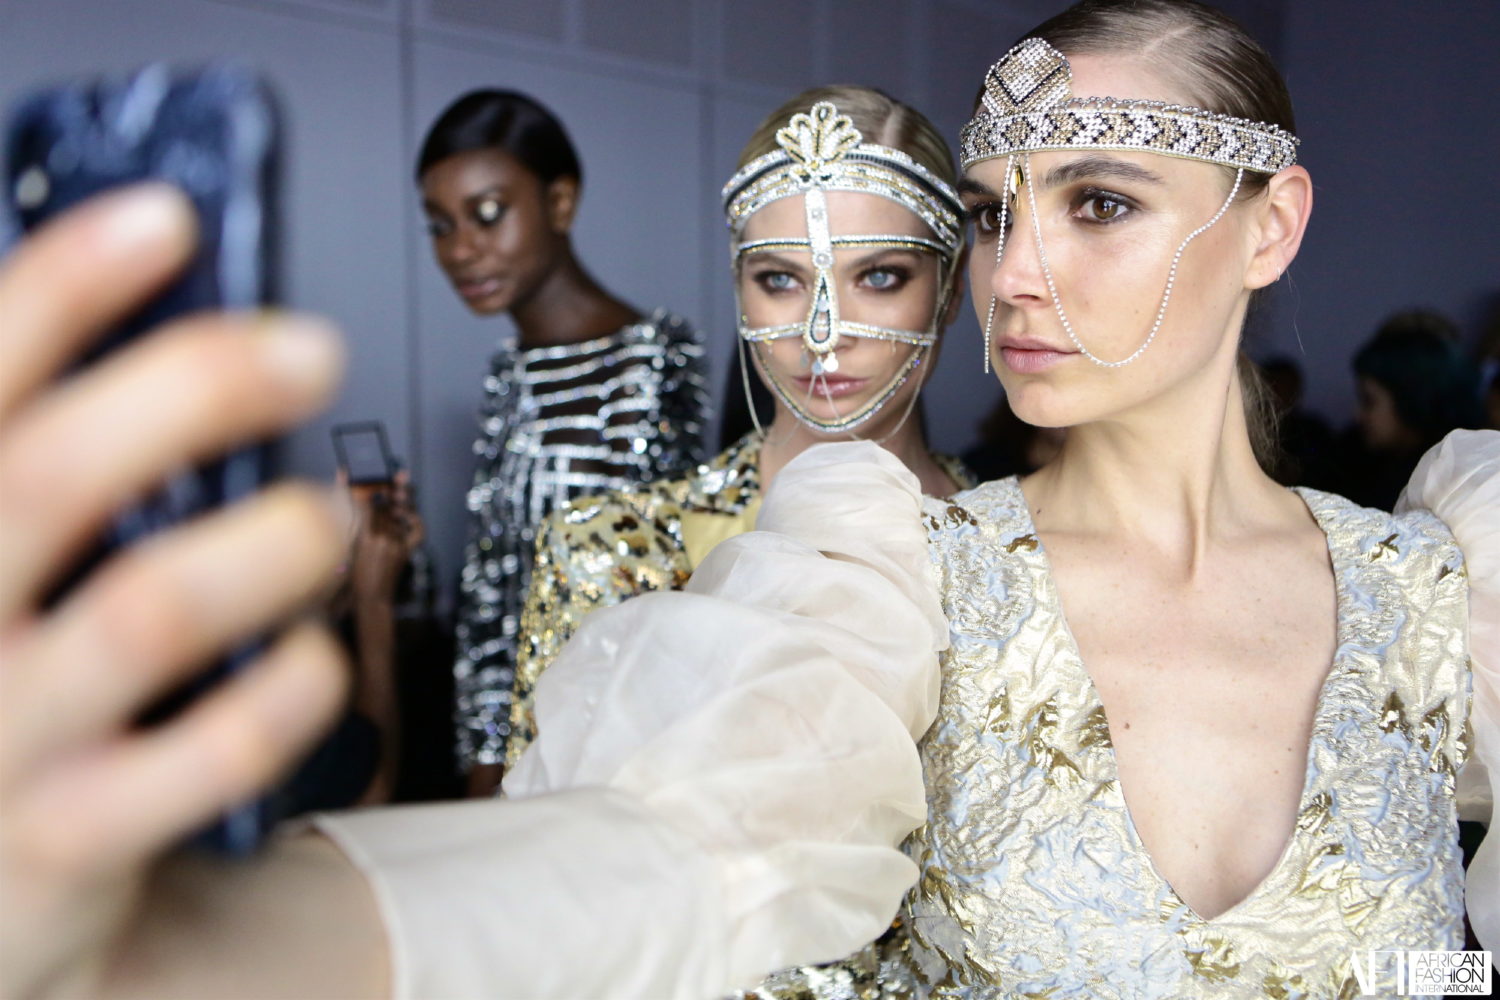 #AFICTFW19 | ALL the Major Backstage Moments You Missed